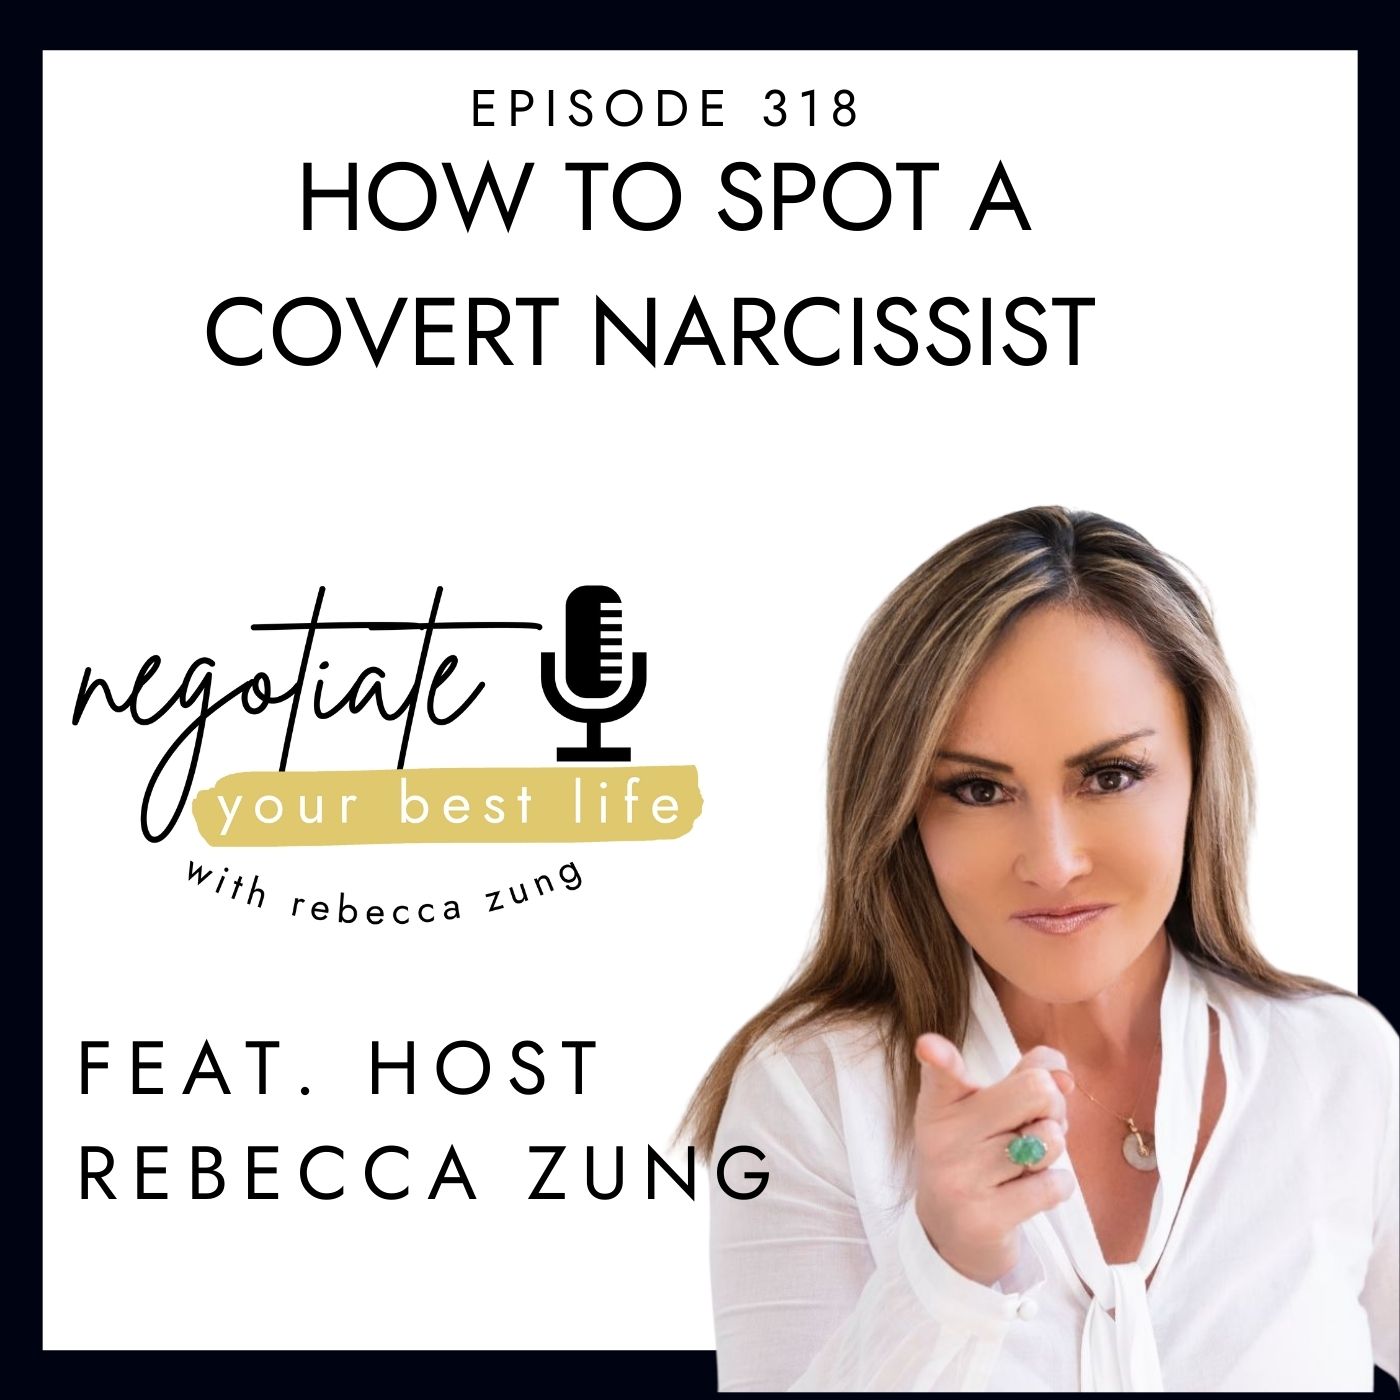 How To Spot a Covert Narcissist with Rebecca Zung on Negotiate Your Best Life #318